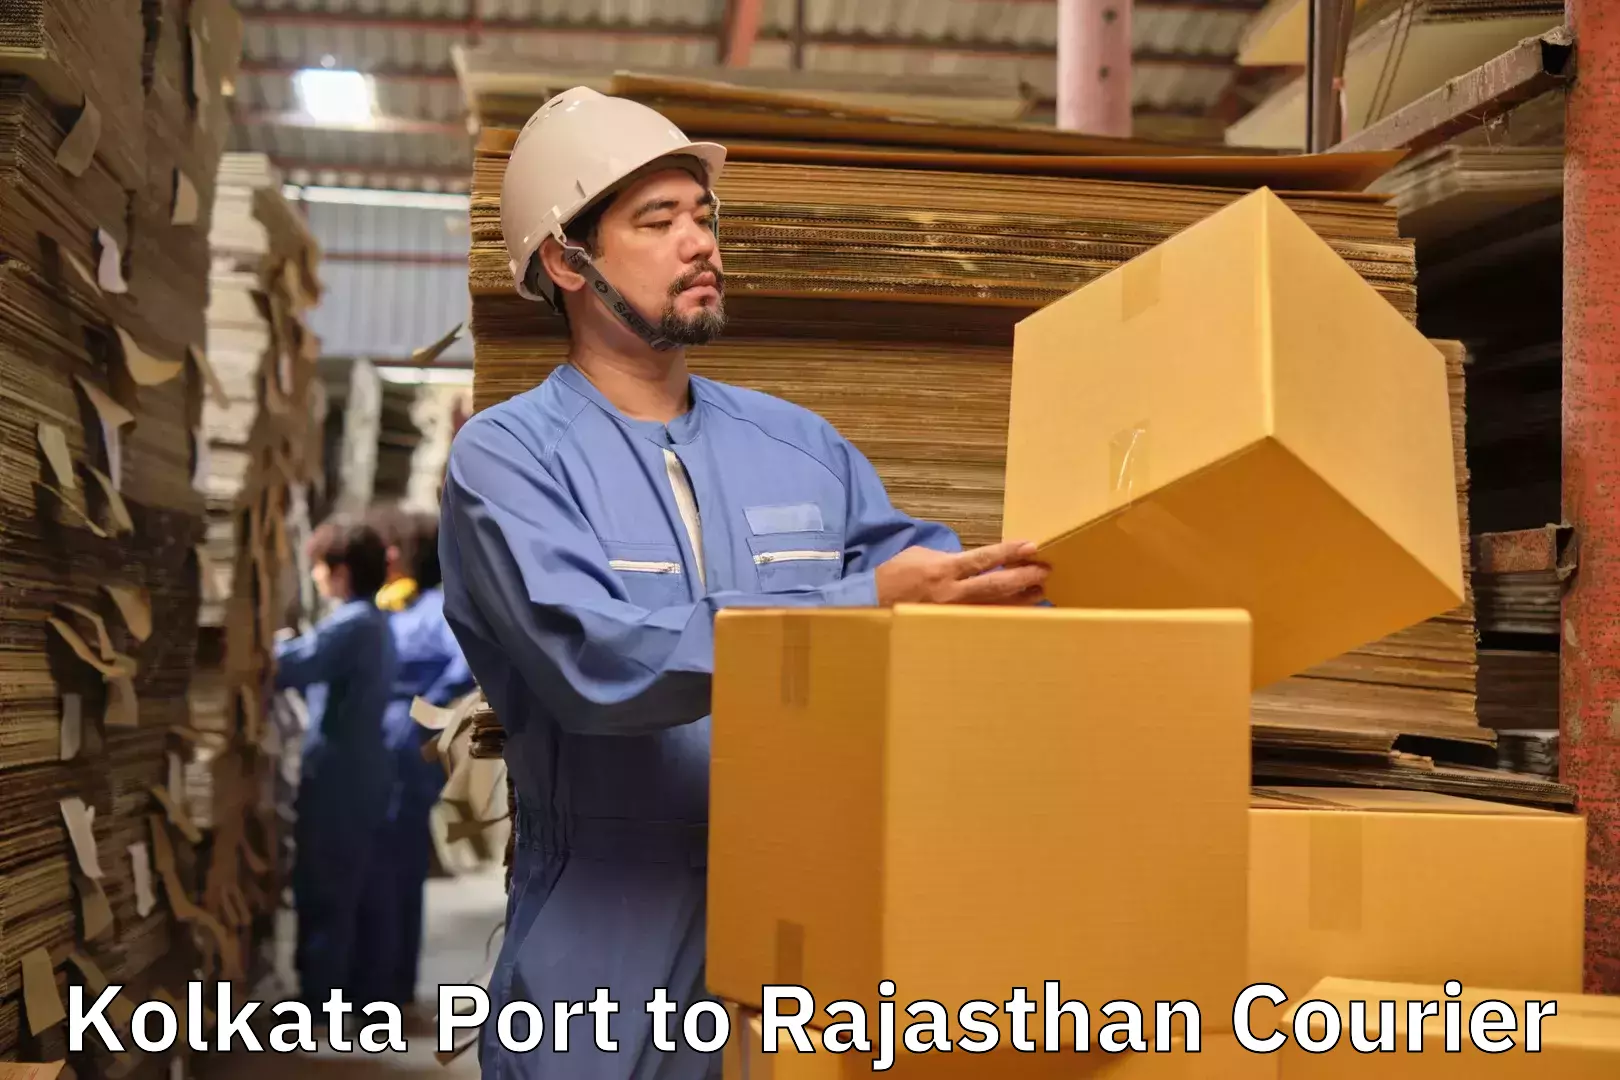 Baggage delivery technology Kolkata Port to Piparcity